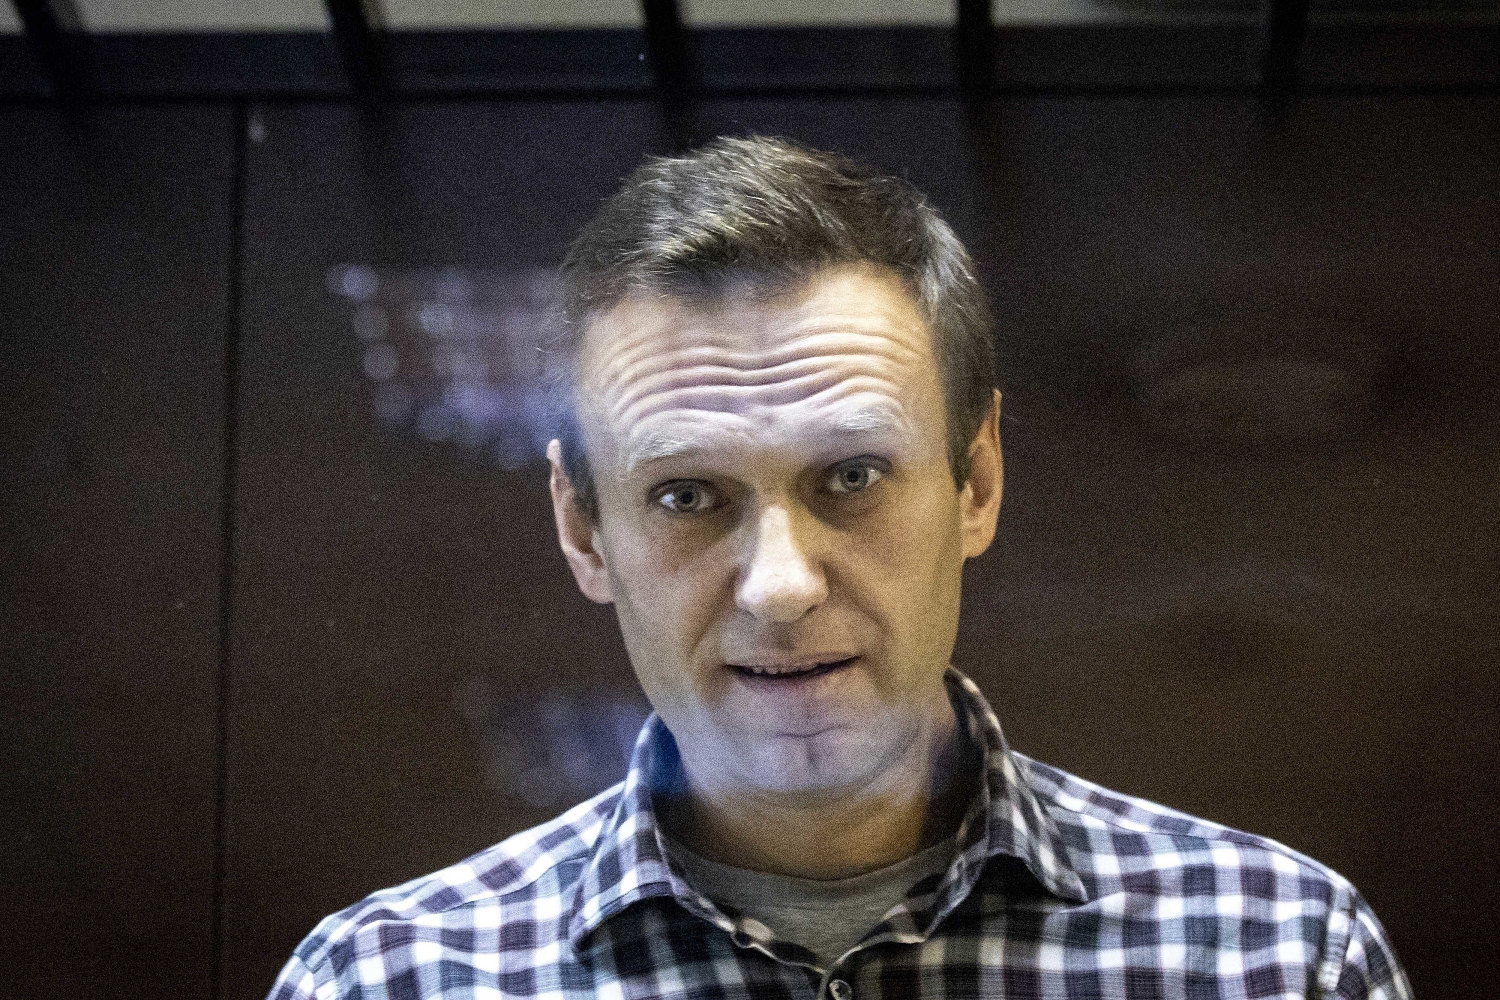 A deal to free Navalny was in the works before his death, and allies say the timing was no coincidence